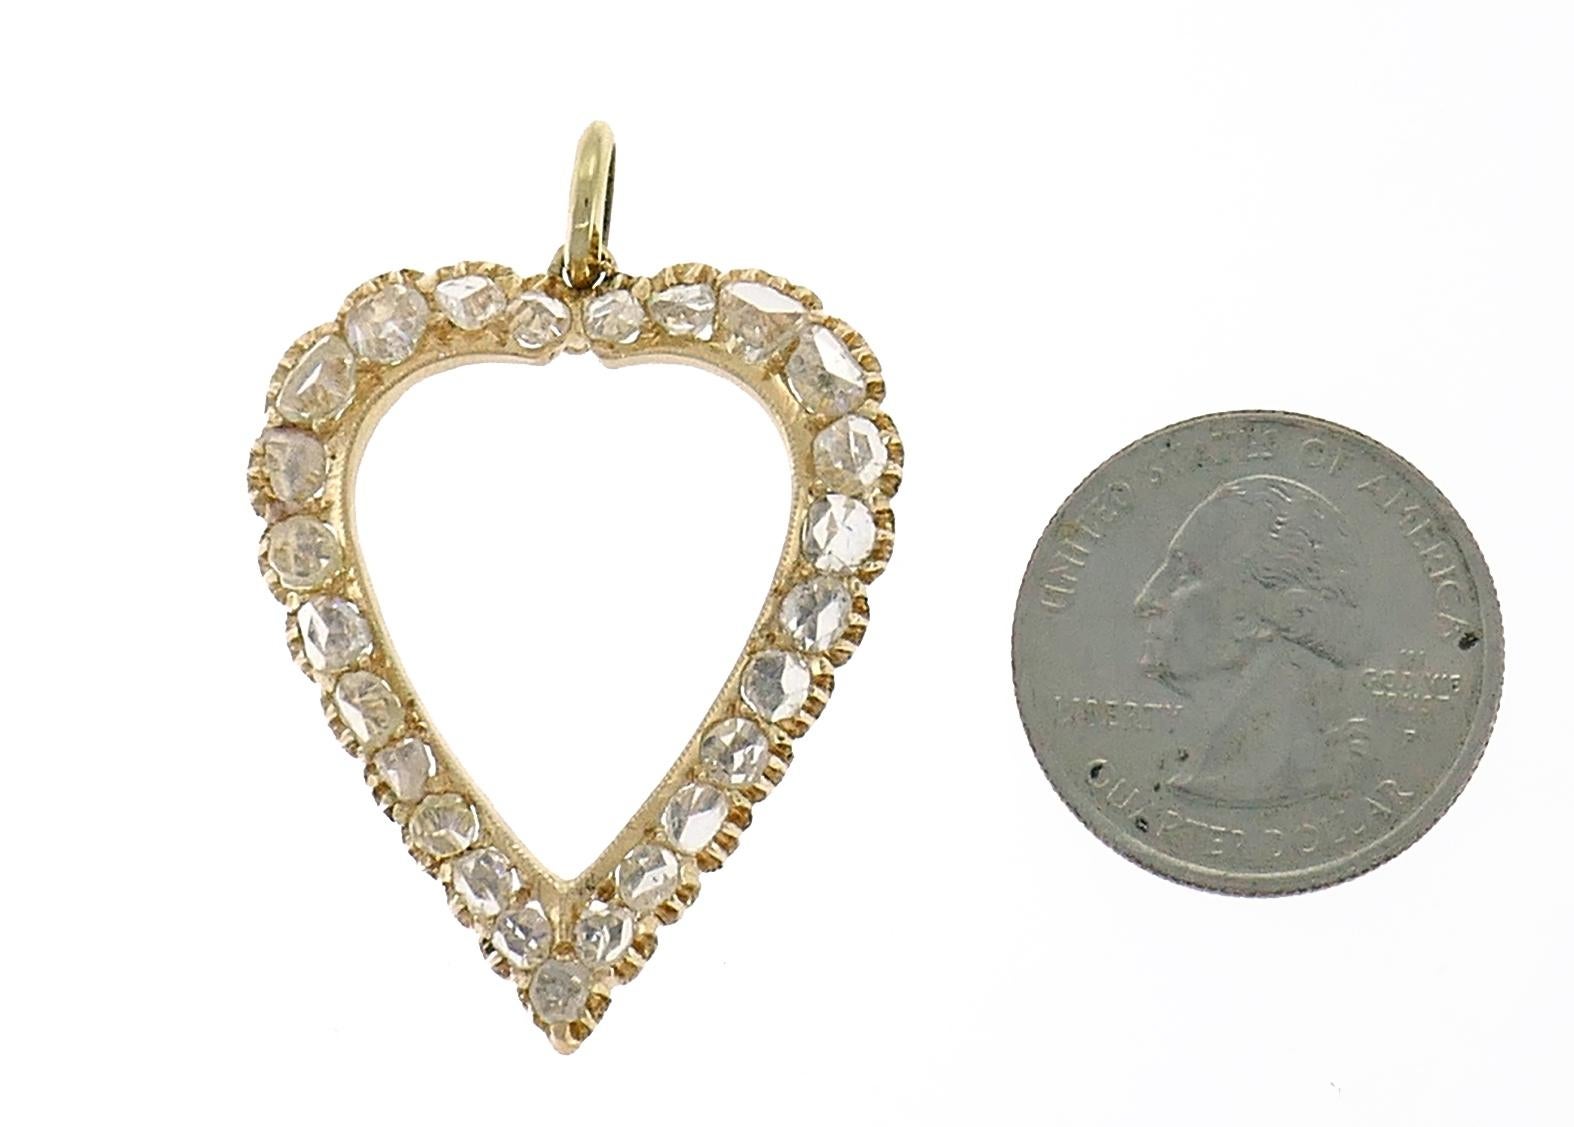 Lovely Victorian open heart pendant.
Made of 14 karat (tested) rose gold and set with twenty-five rose cut diamonds (H-I color, Si clarity, approximately 1.70 carats total weight).
Measurements: 1.5 x 1.25 inches (4 x 3.3 cm).
Weight: 6.5grams.